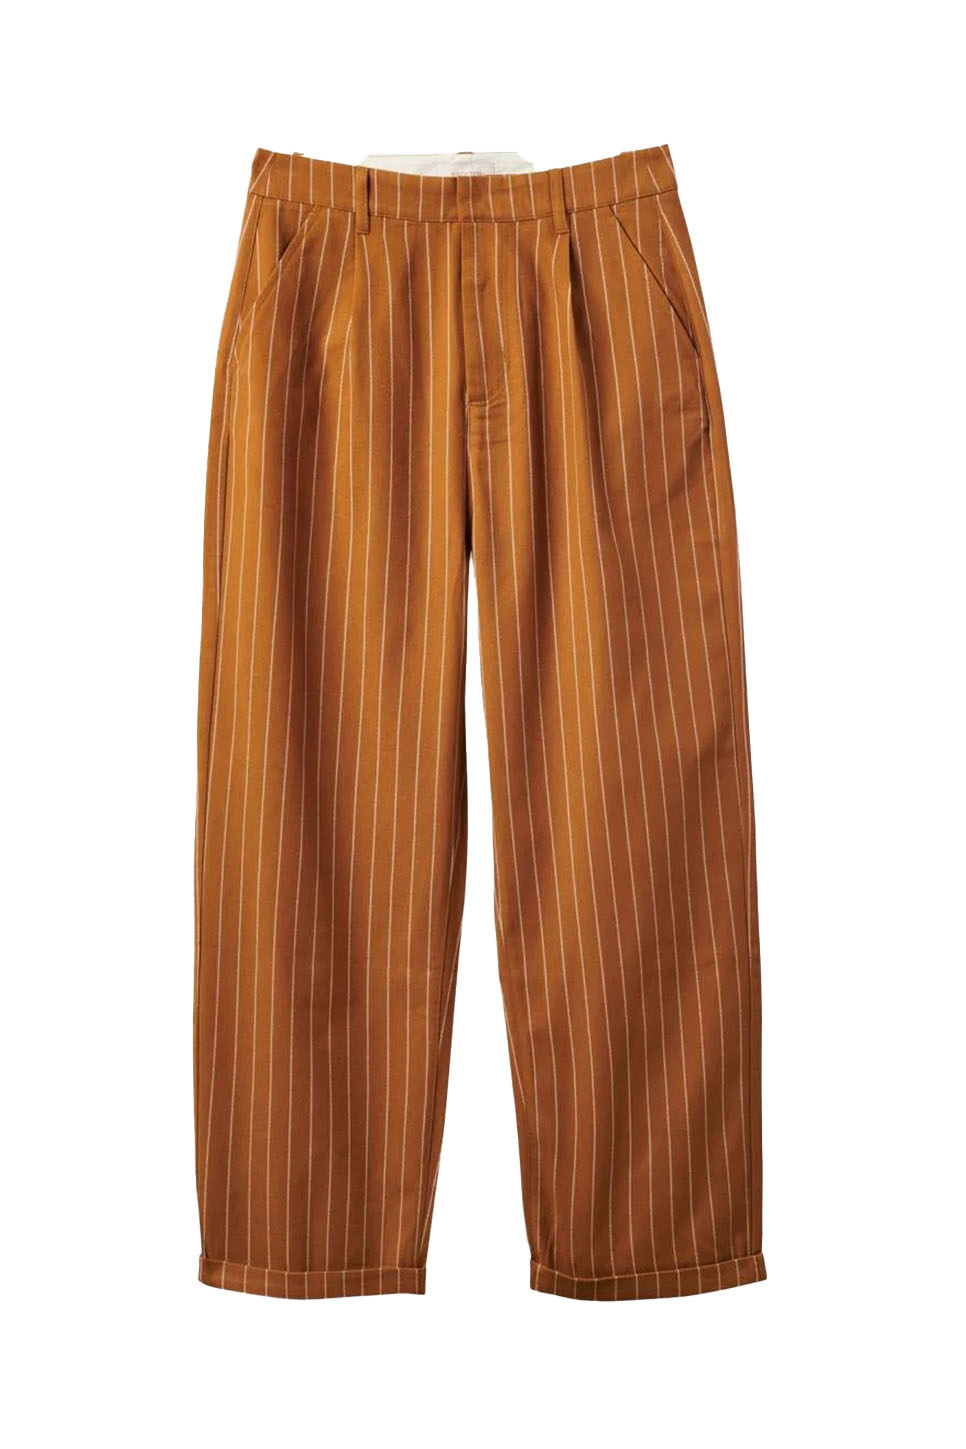 VICTORY TROUSER PANT - WASHED COPPER PINSTRIPE